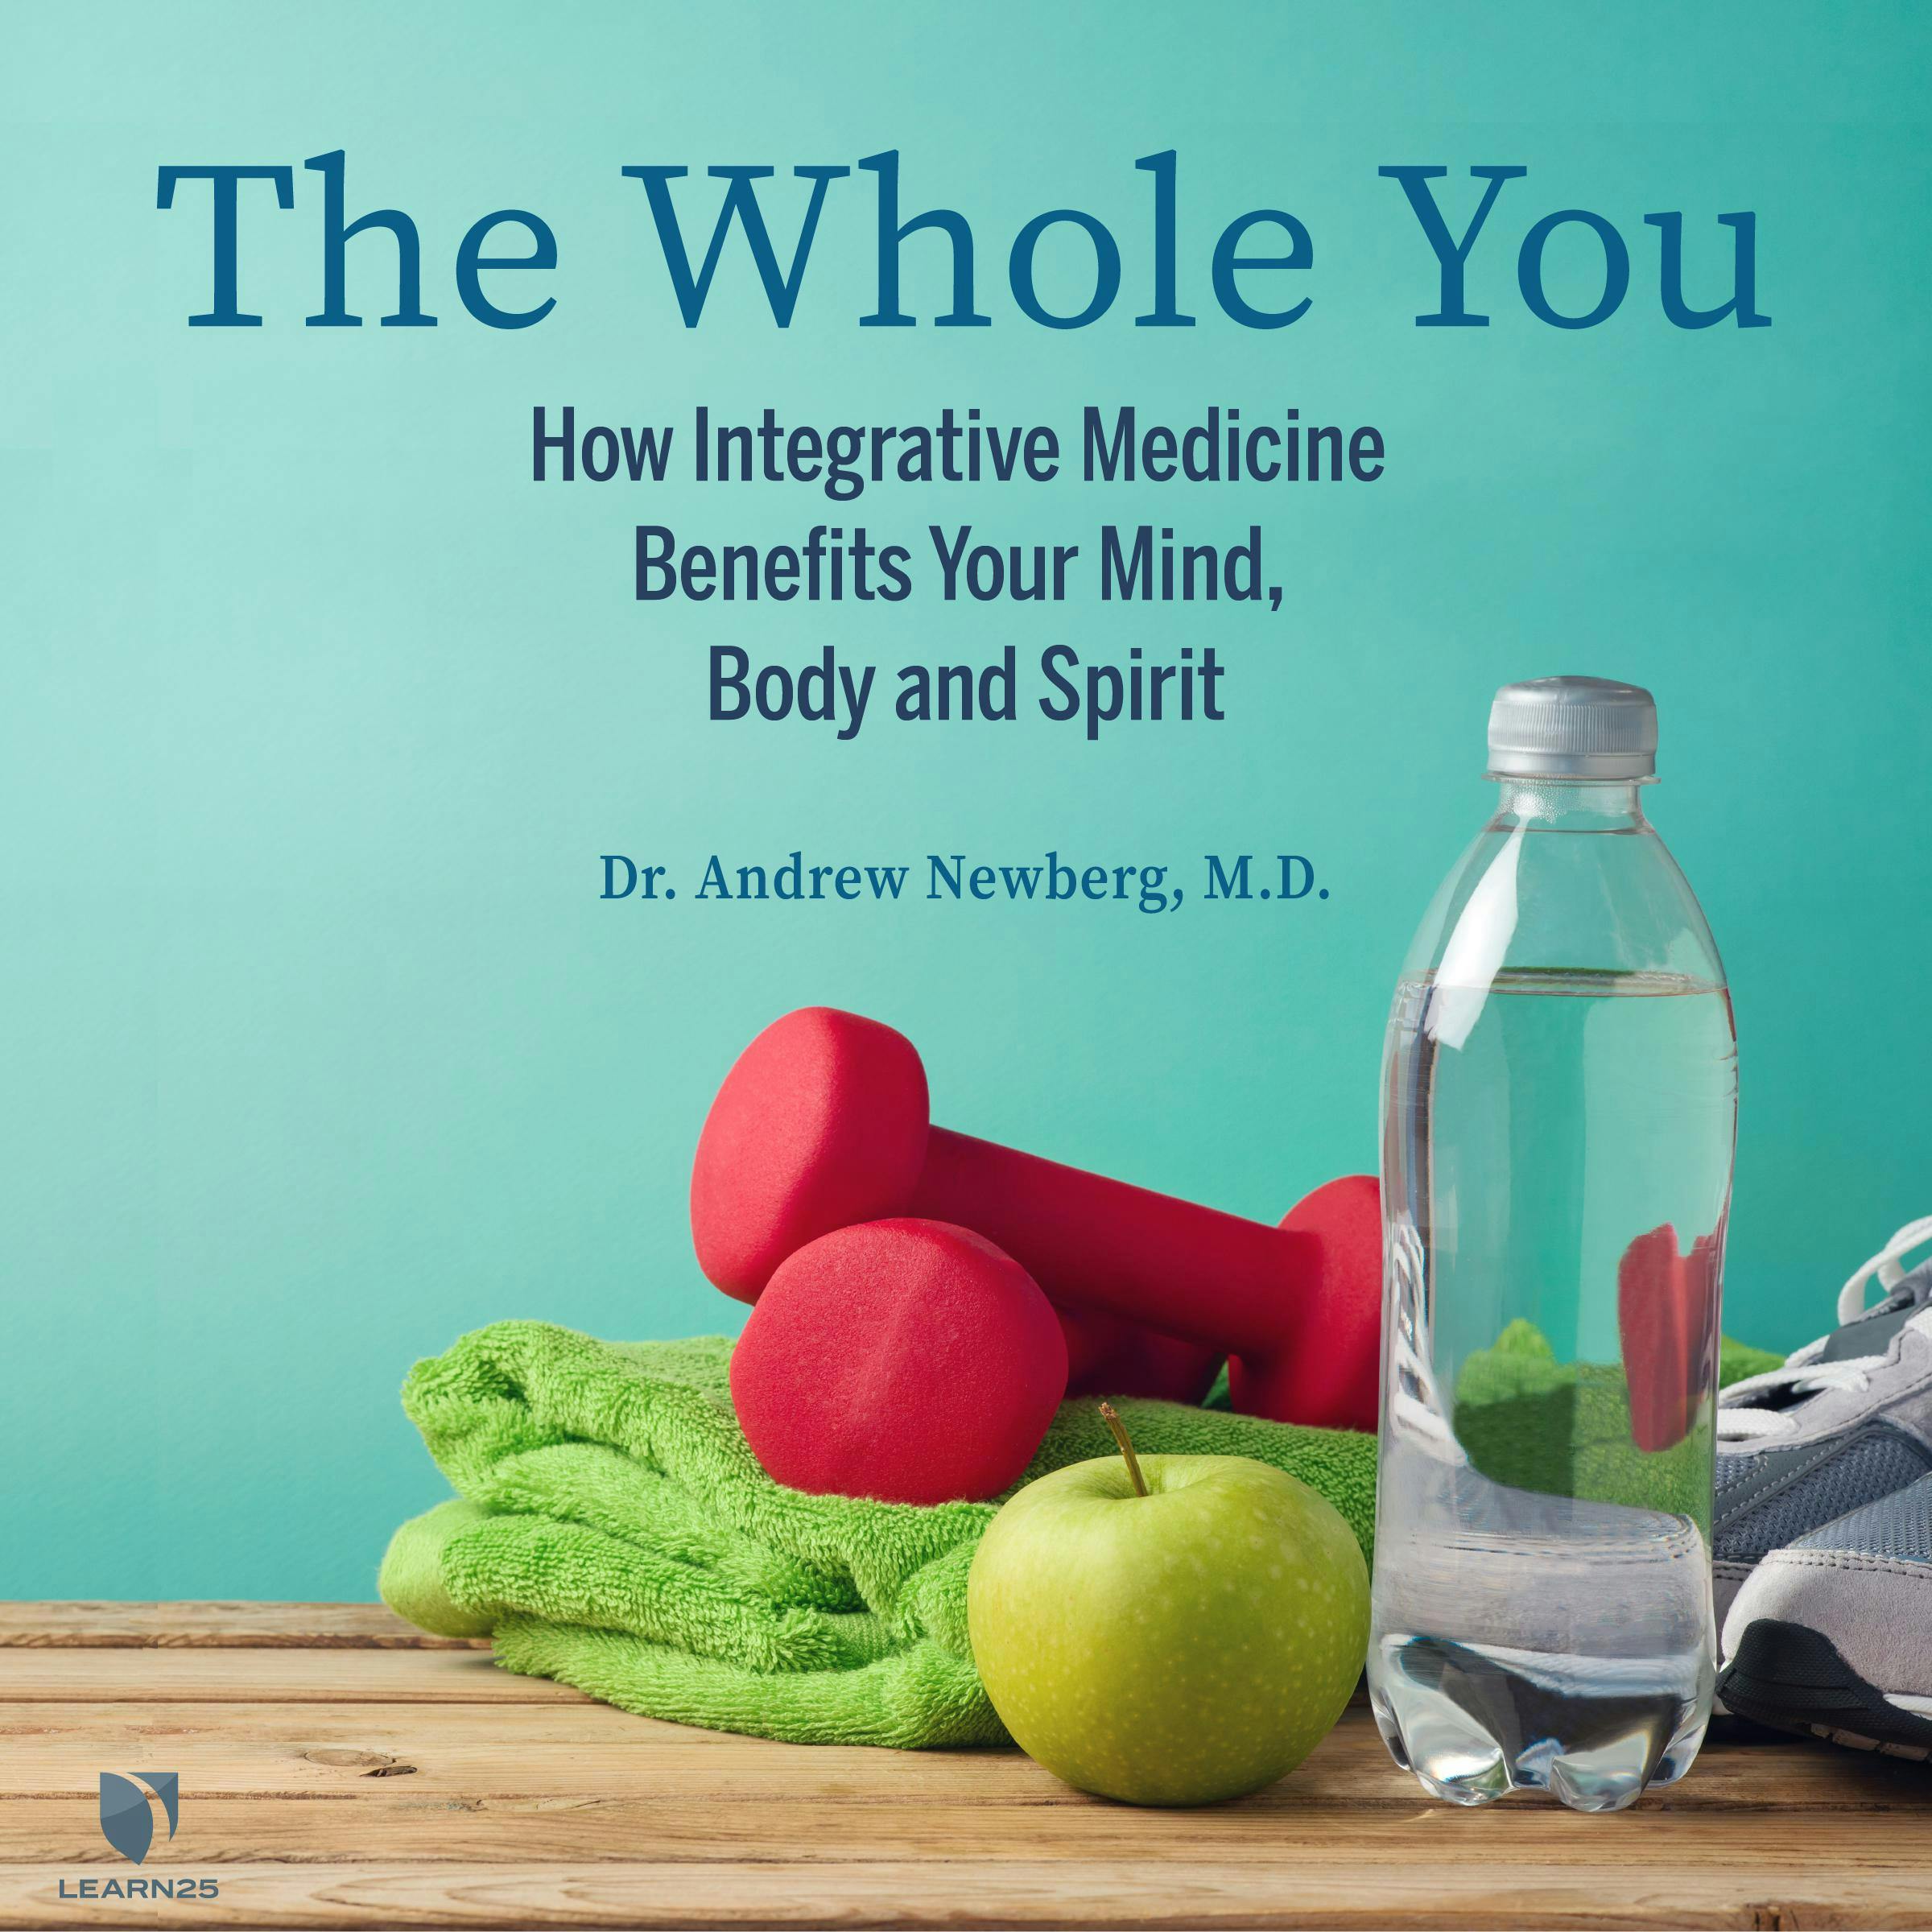 The Whole You: How Integrative Medicine Benefits Your Mind, Body, and Spirit - Andrew Newberg